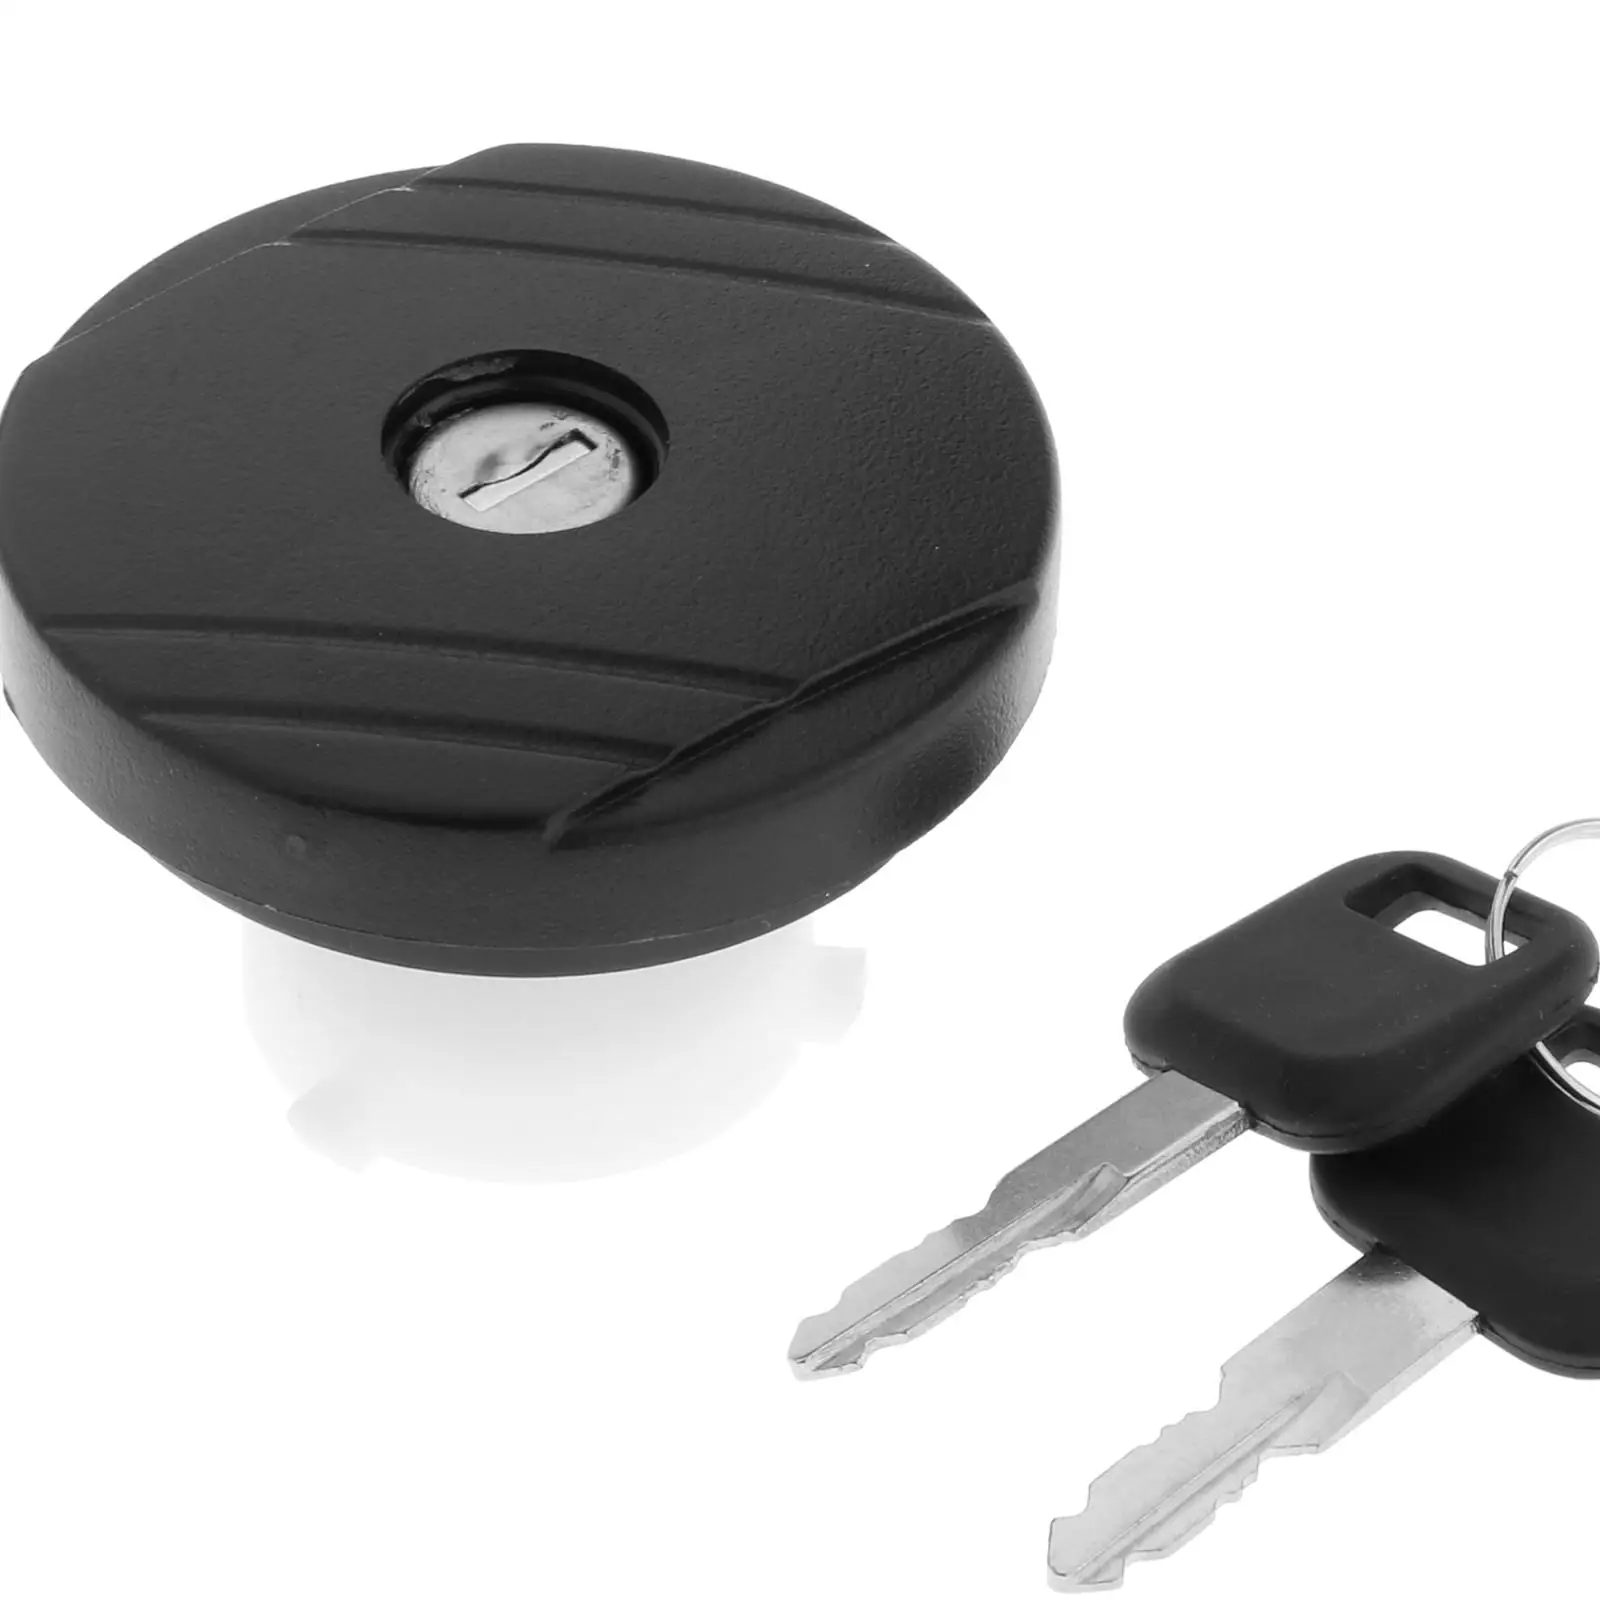 Fuel Tank Cover and 2 Keys Fit for Ford Transit MK6 MK7 00-14 Replacement